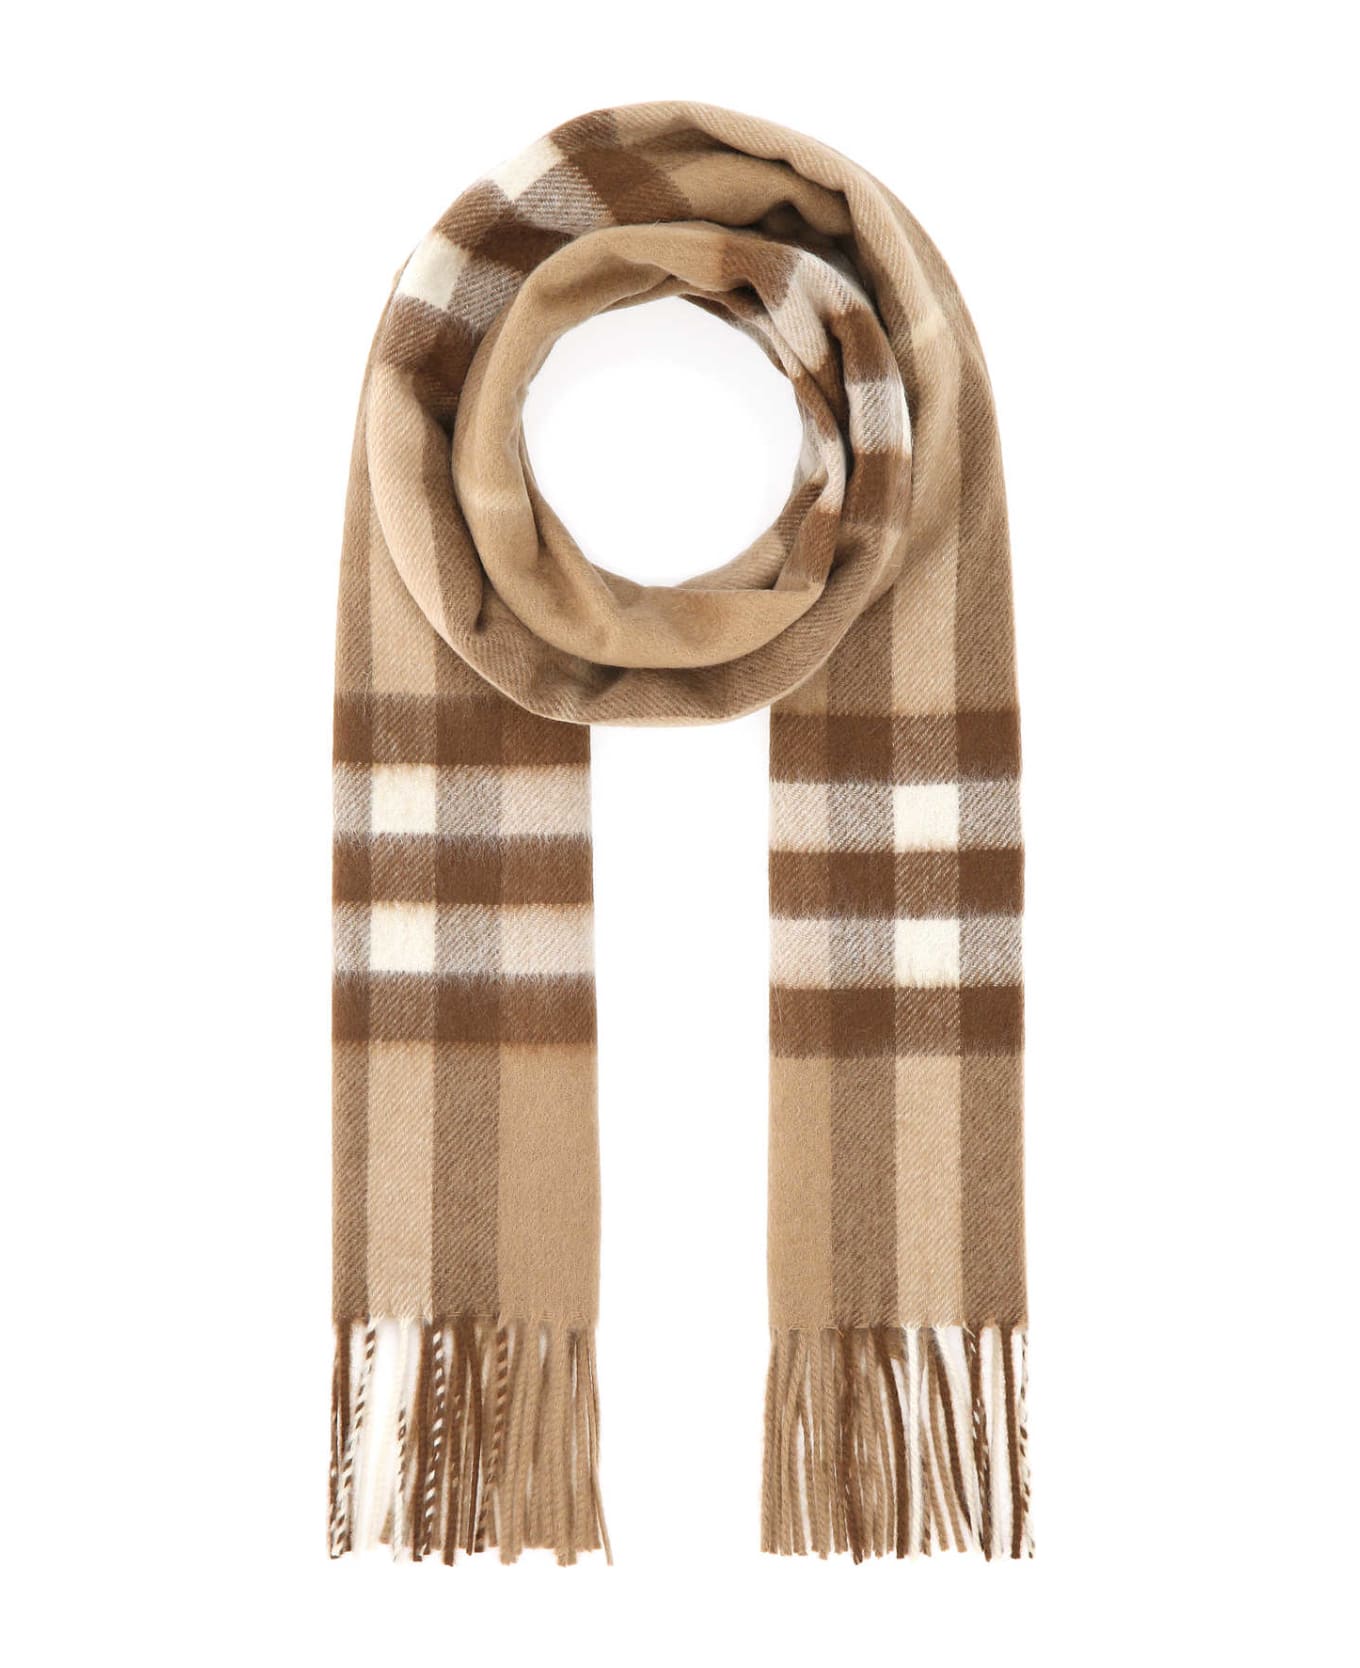 Burberry Embroidered Cashmere Scarf - A1353 スカーフ